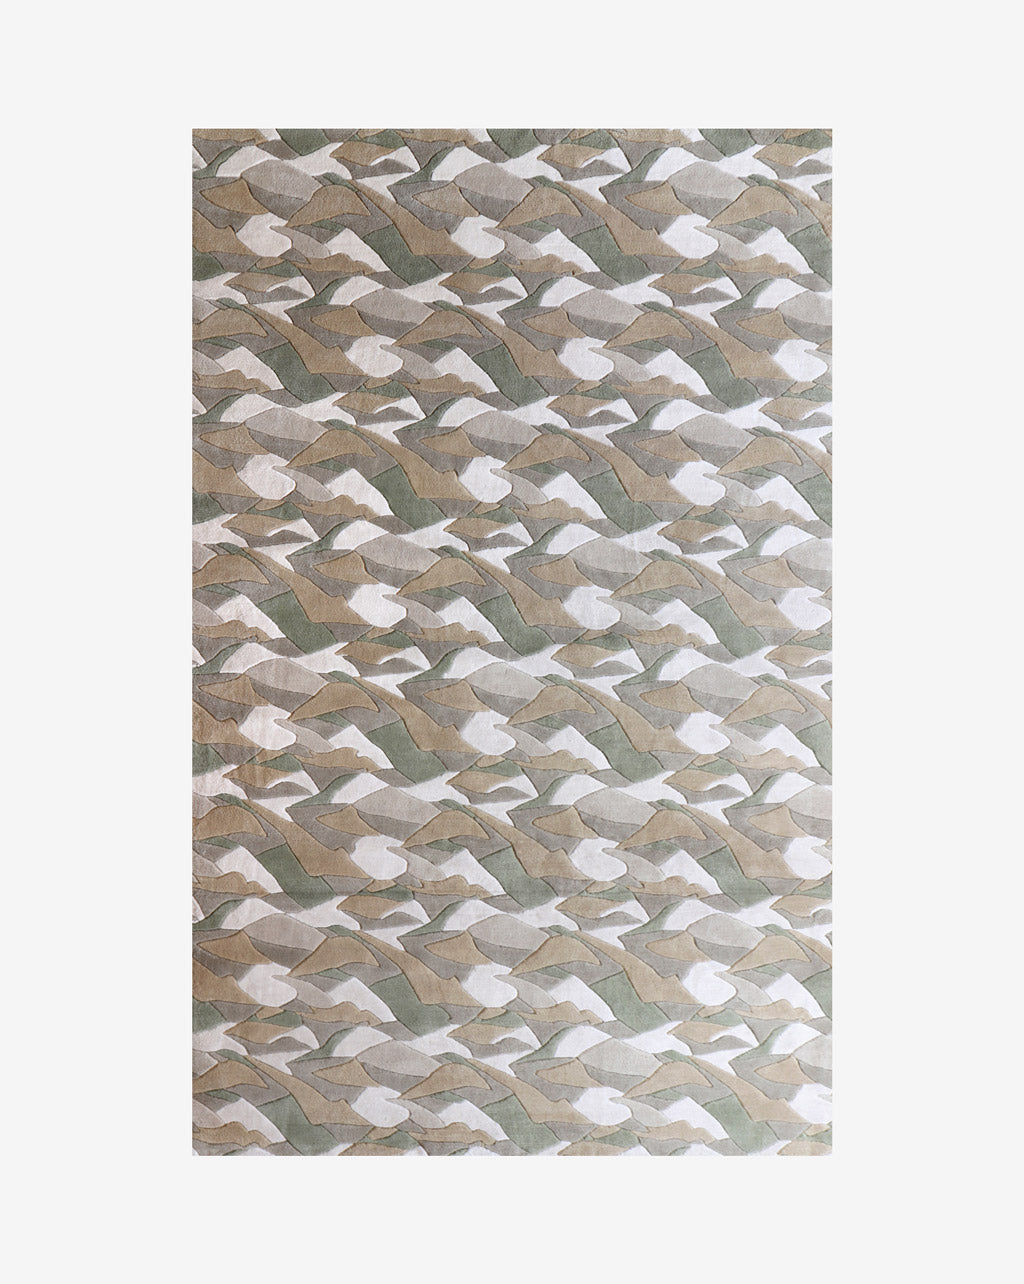 A Mani Hand Knotted Rug 5' x8' Earth made of sumptuous merino wool, with hand-cut bevels and a wavy pattern in beige and white